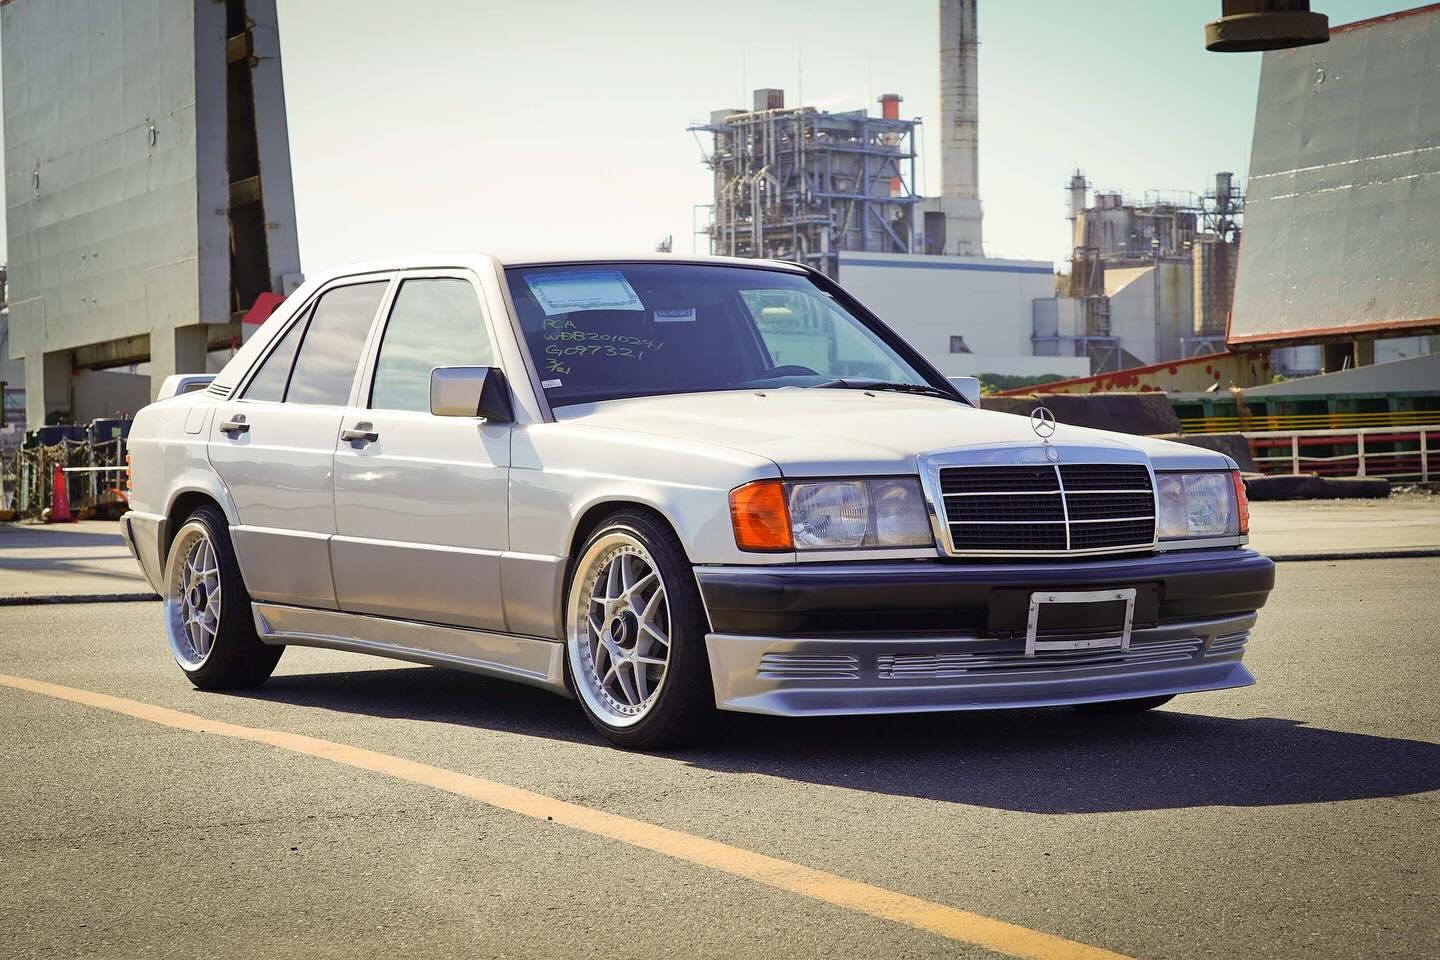 1993 Mercedes 190e purchased from a dealer in Japan. This beauty was then imported direct into USA for a customer in Sandpoint Idaho.

______________________
FOR MORE INFORMATION
Call 403-618-3506
Email info@zenautoworks.ca
www.zenautoworks.ca

We ha